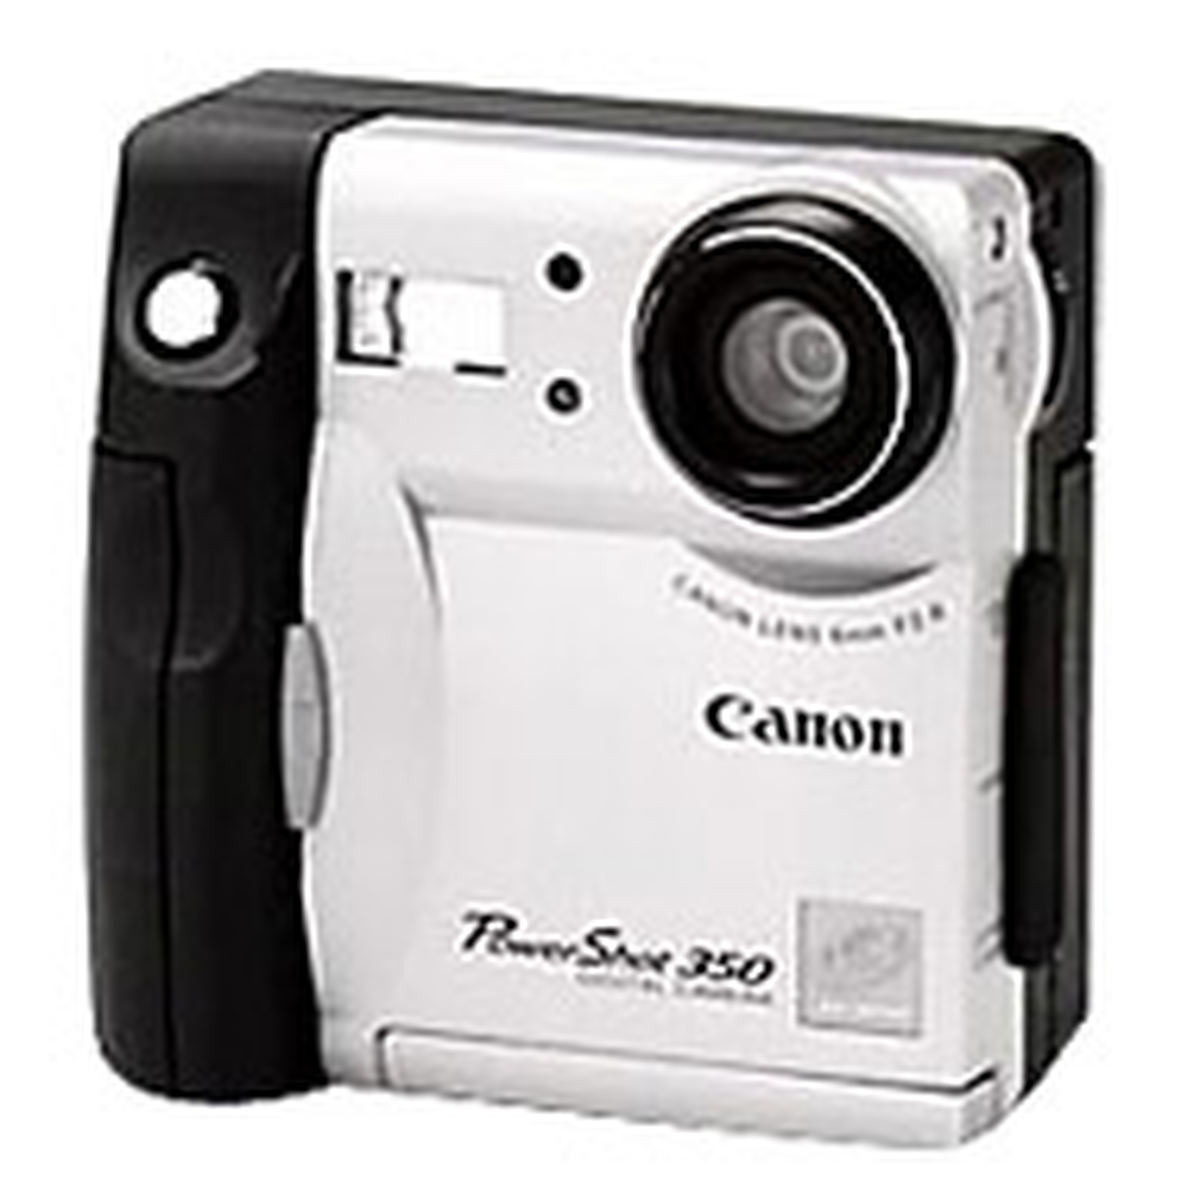 Canon PowerShot 350 : Specifications and Opinions | JuzaPhoto